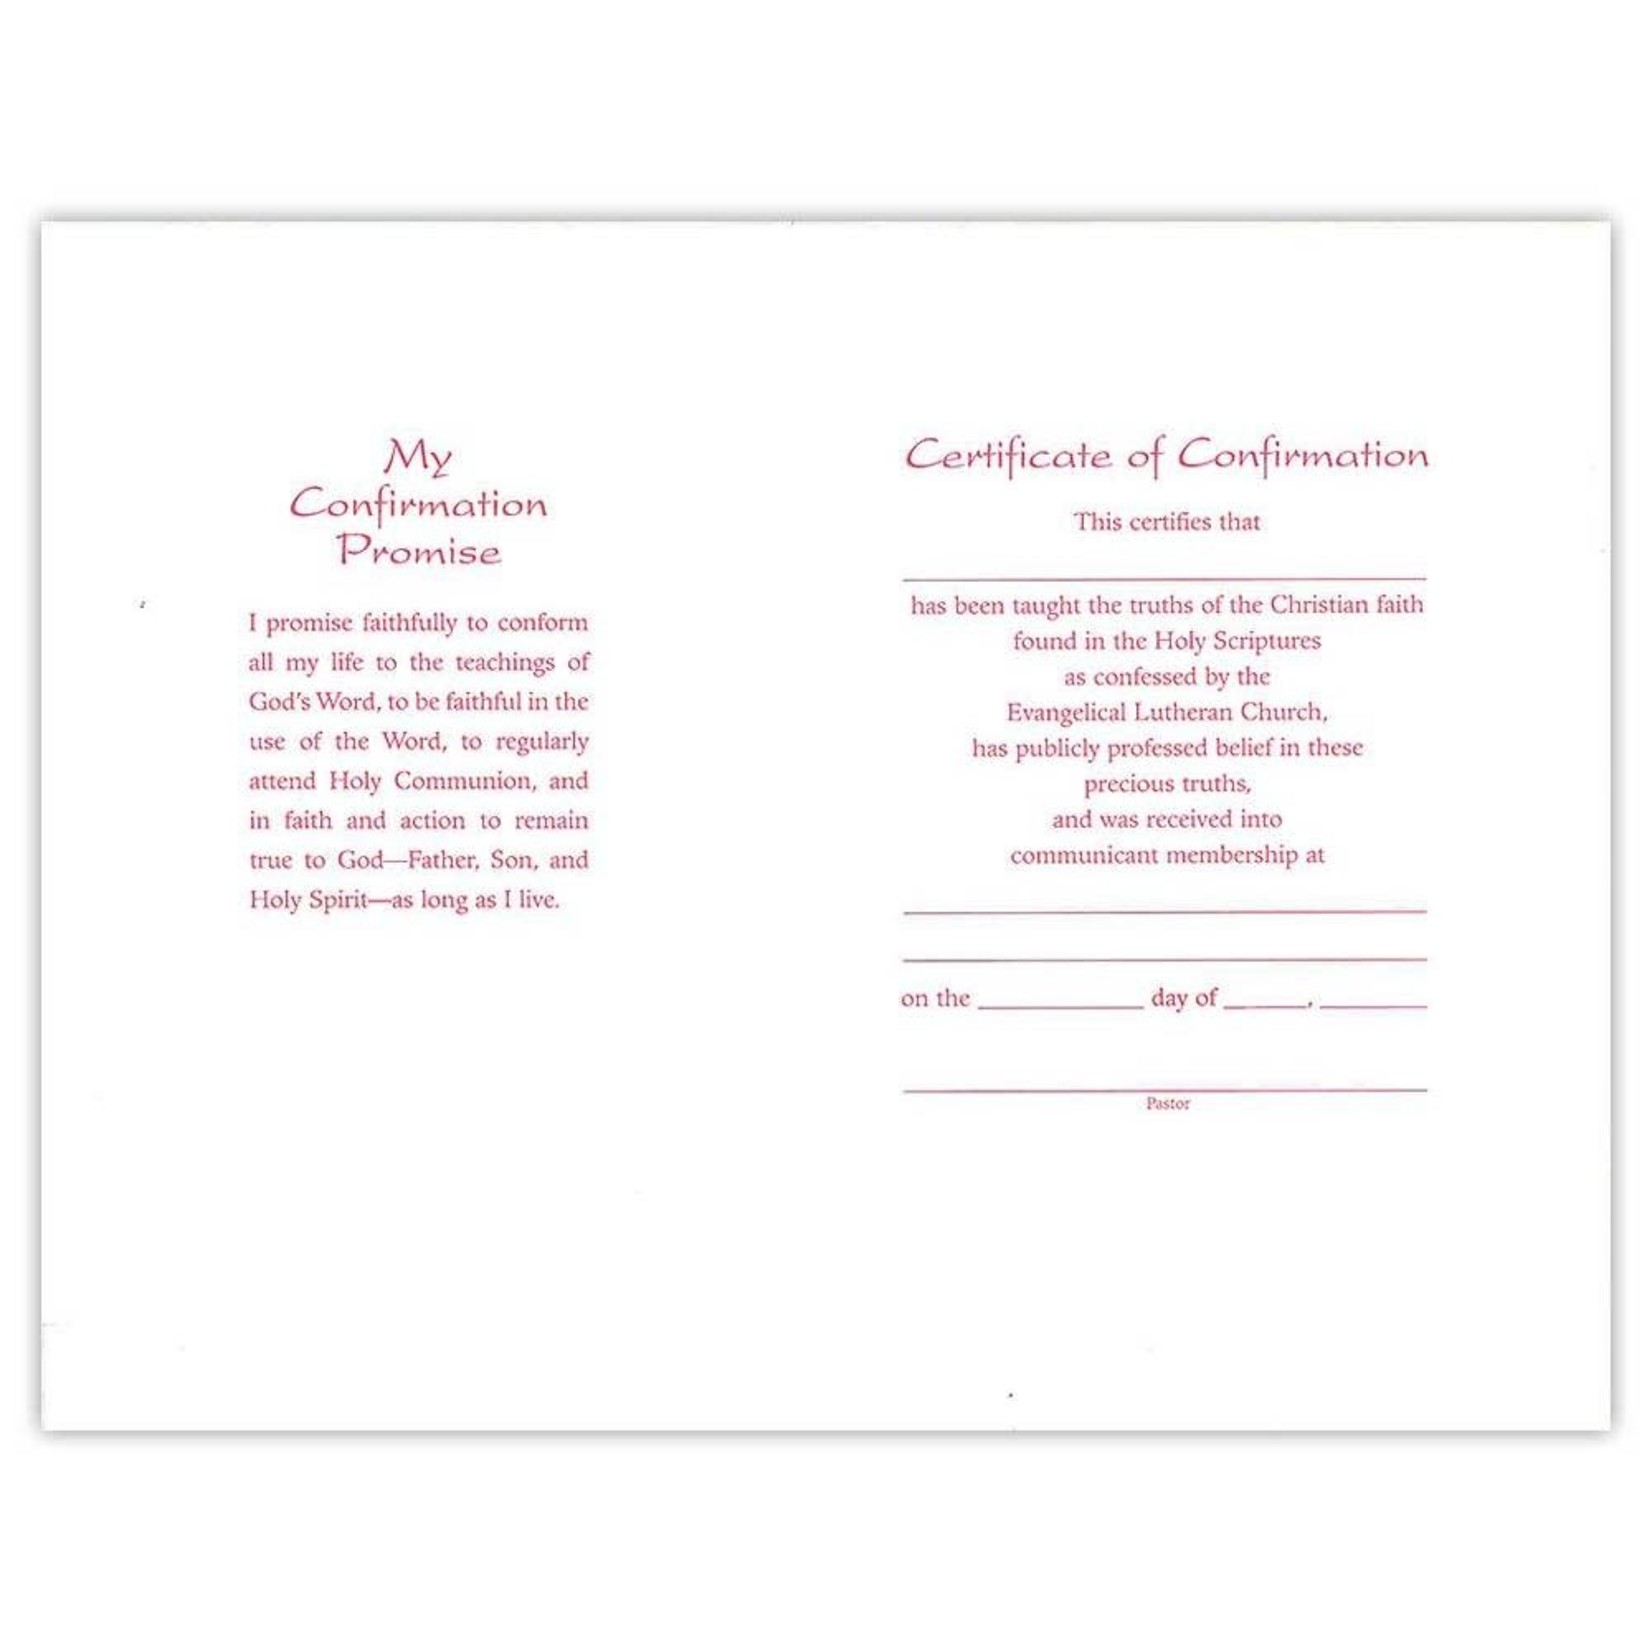 Northwestern Publishing House Confirmation Certificate - Various Verses